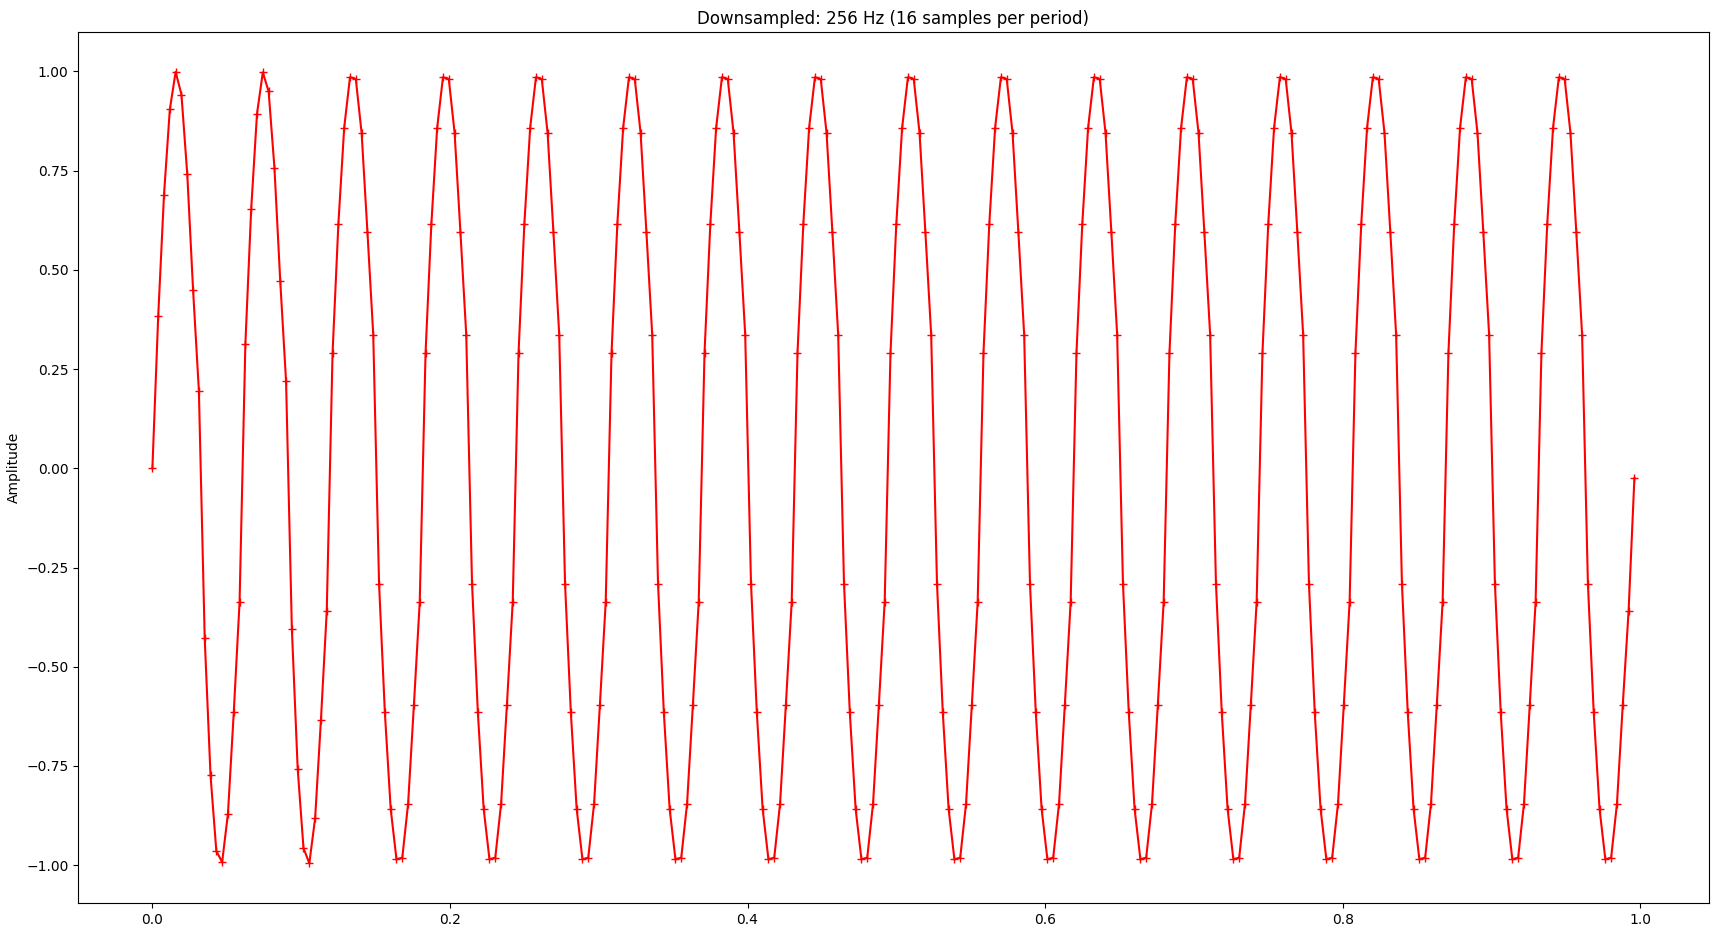 A sine wave with 16 Hz consisting of 4096 samples downsampled to 256 samples